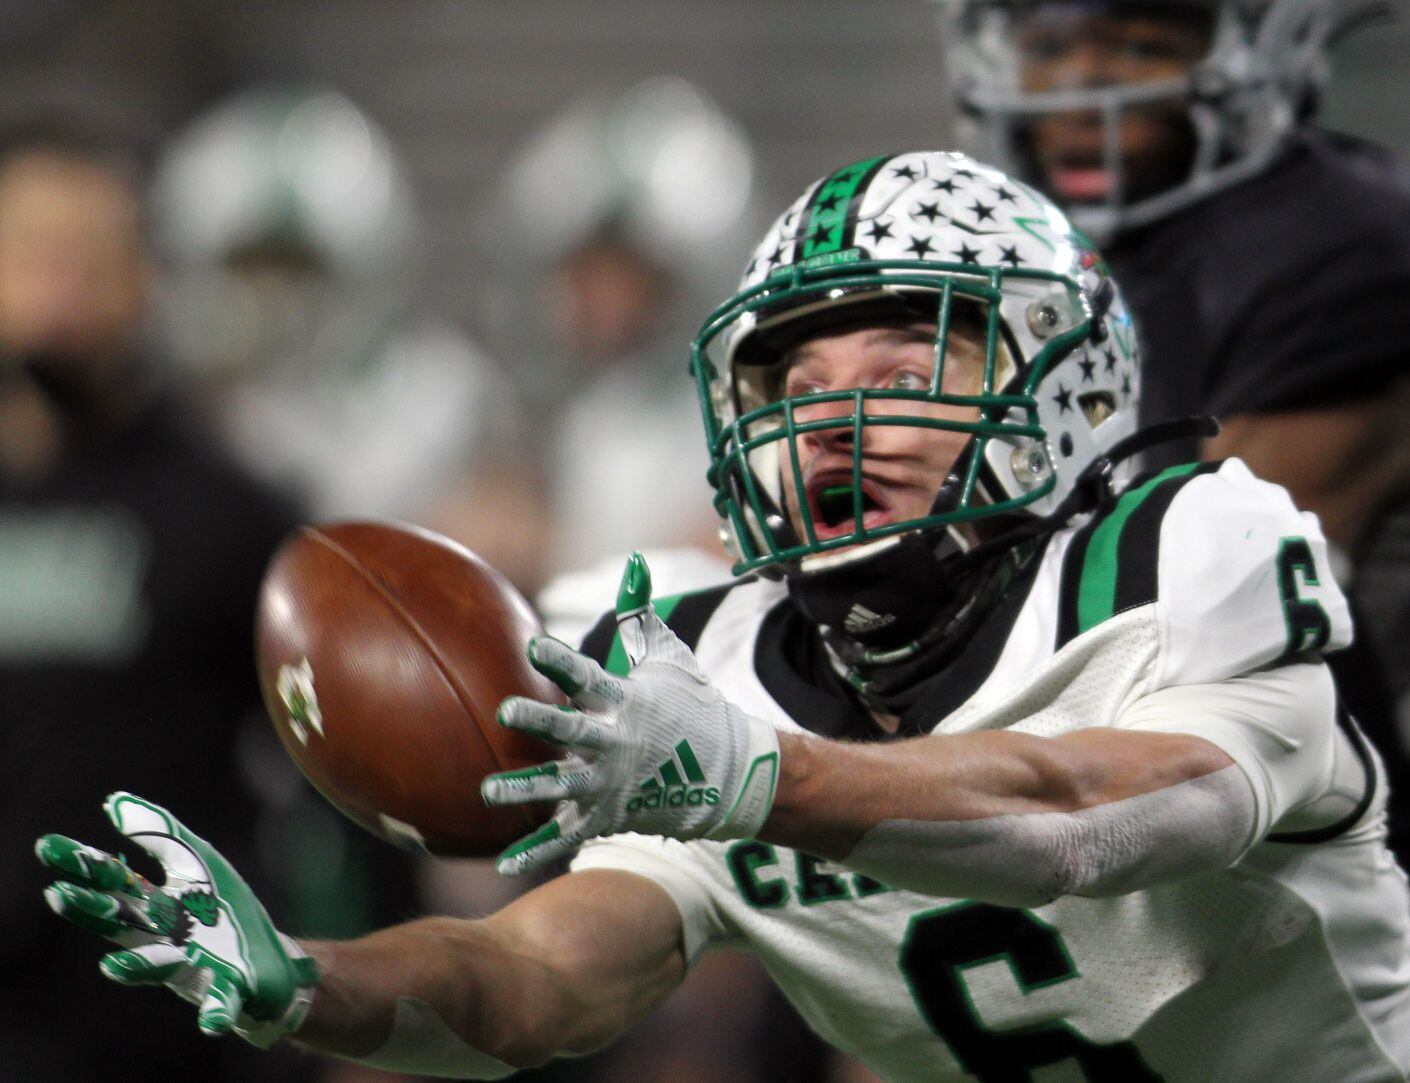 Southlake receiver Landon Samson (6) lunges for a pass but is unable to secure the catch...